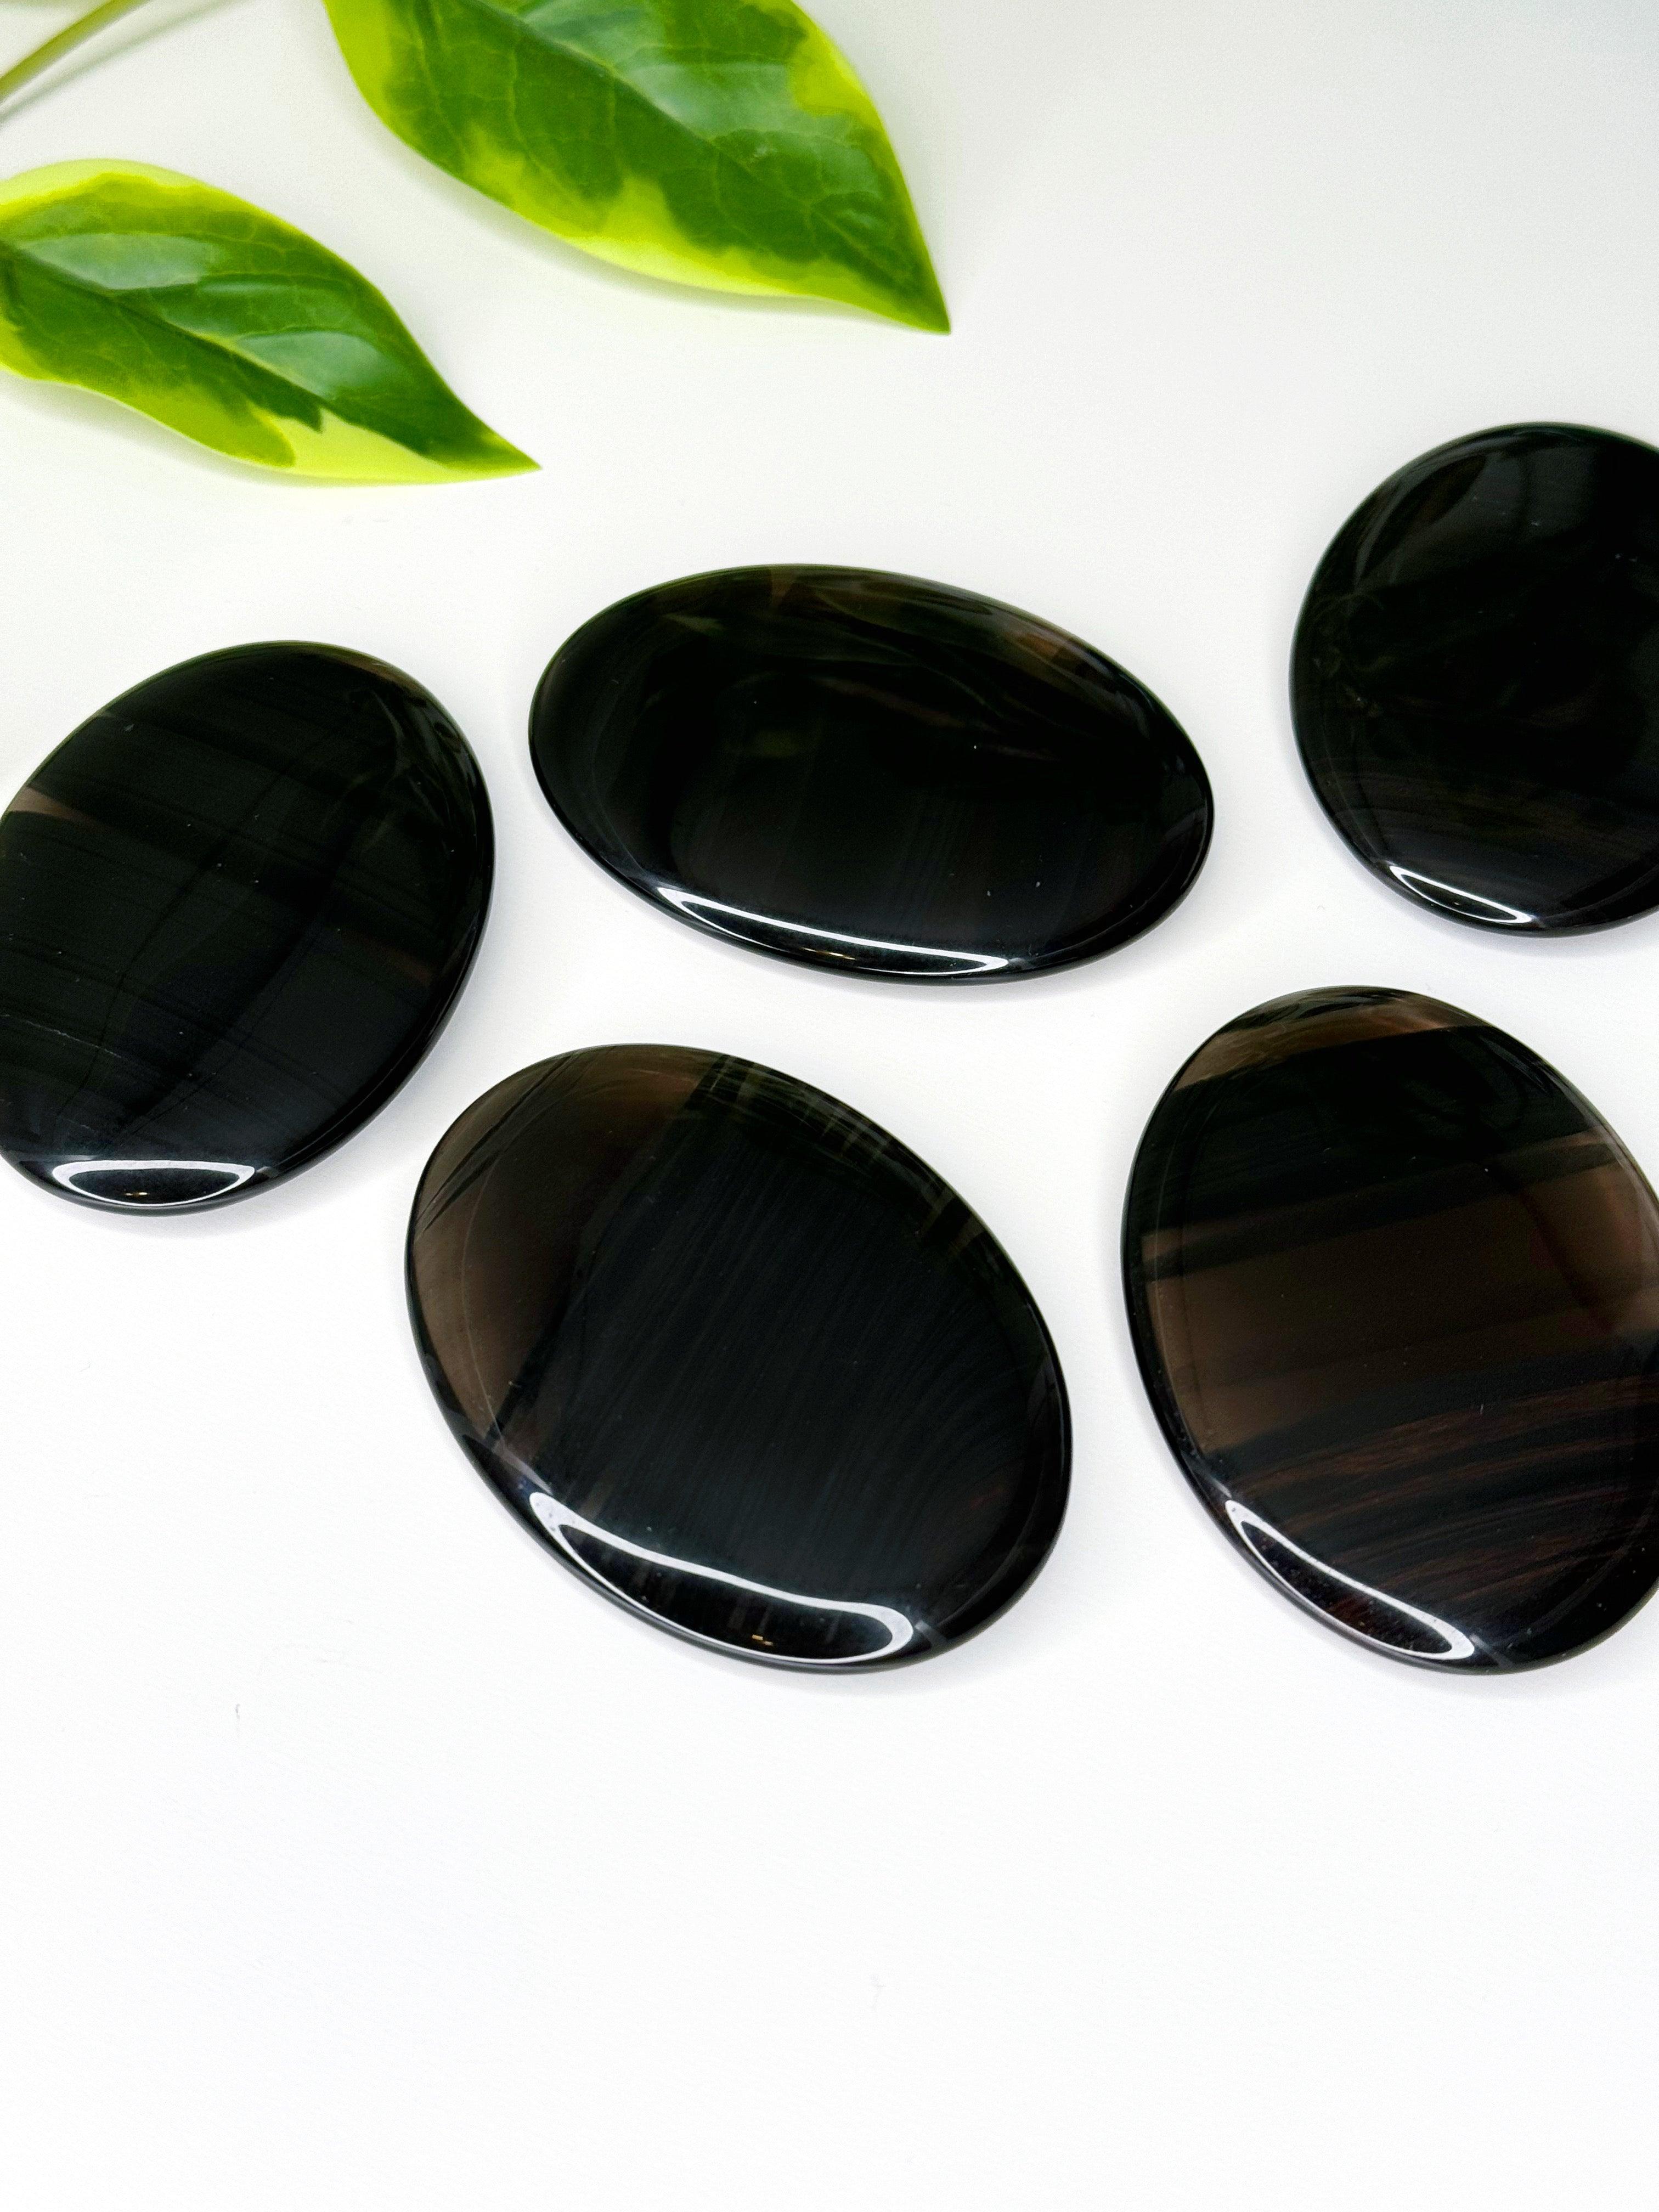 PICK YOUR OWN: MIDNIGHT LACE OBSIDIAN PALM STONE - end of year sale, holiday sale, mercury rx, midnight lace obsidian, obsidian, palm, palm stone, palmstone, recently added, Scorpio Season - The Mineral Maven